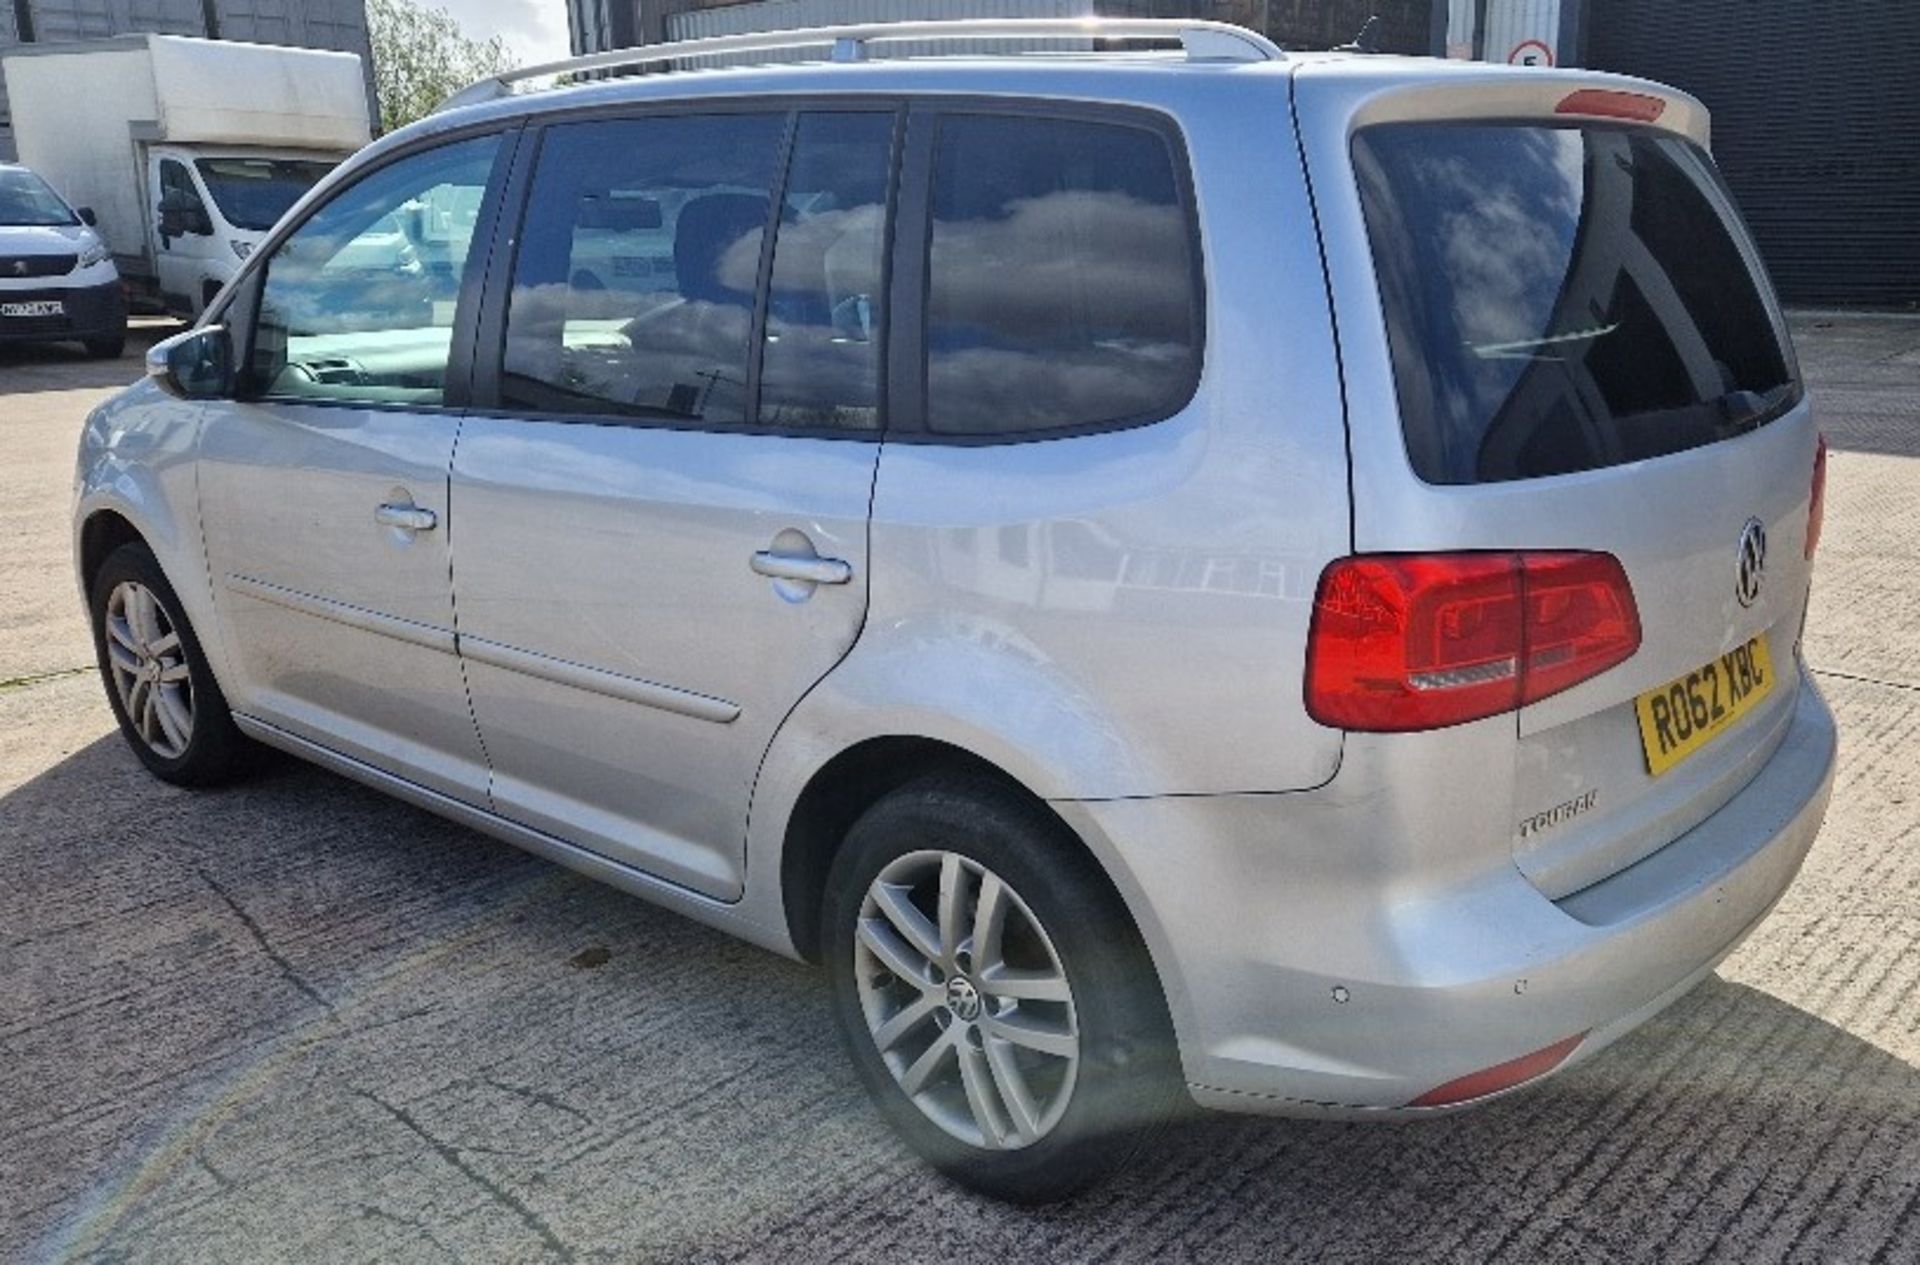 SILVER VOLKSWAGEN TOURAN SE TDI S-A DIESEL MPV 1598CC FIRST REGISTERED 17/10/2012 REG: RO62XBC - Image 4 of 9